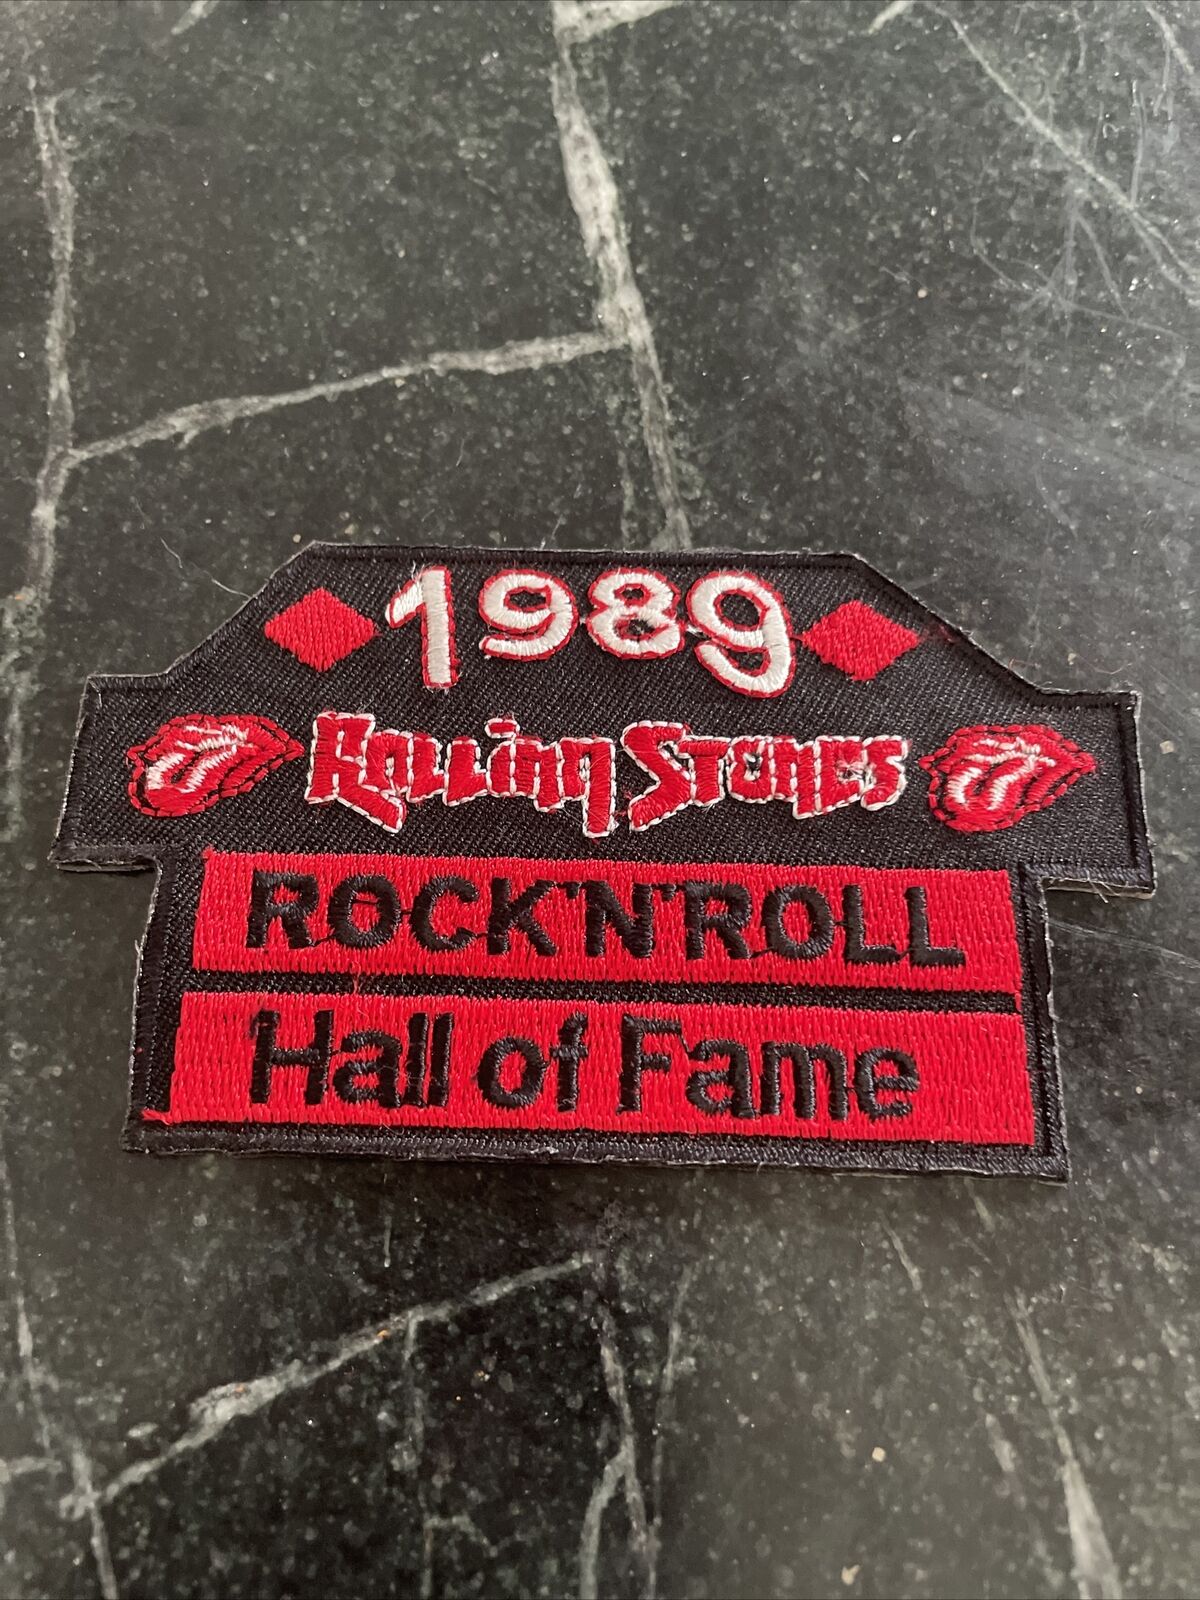 Rolling Stones 1989 Rock Roll Hall Fame Iron On Patch Vtg Rare Embroidered